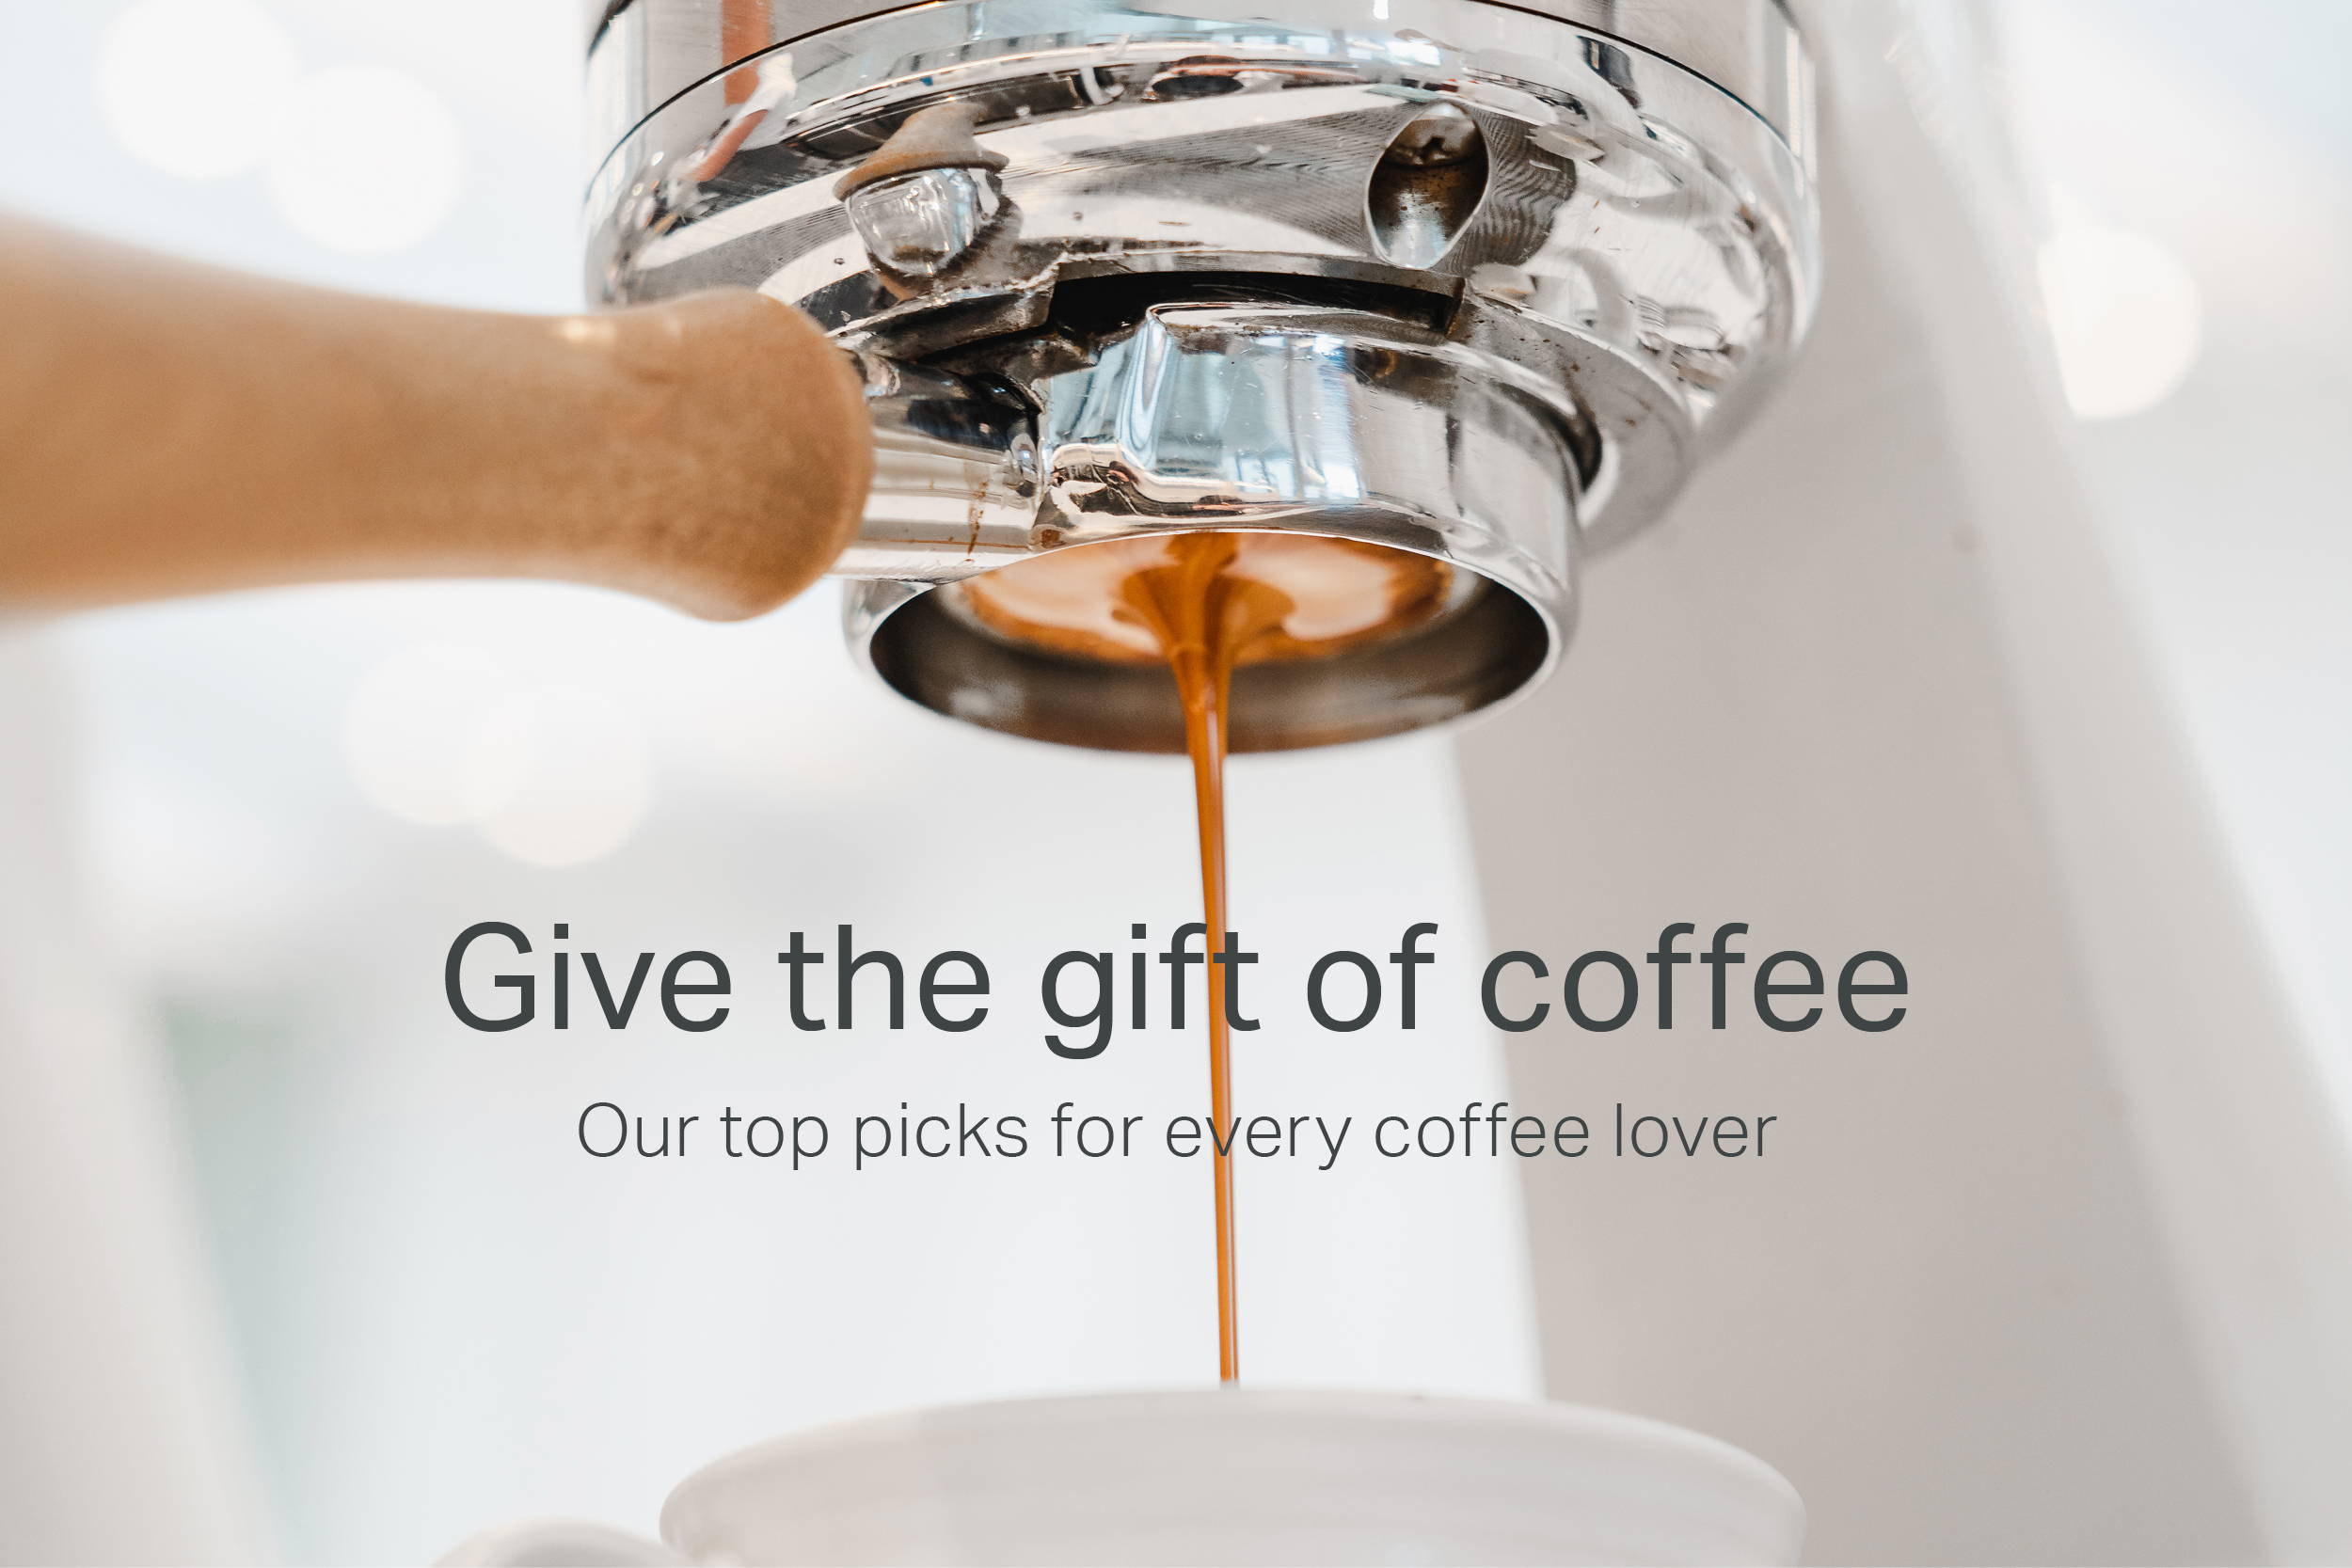 Give the gift of coffee with Industry Beans!